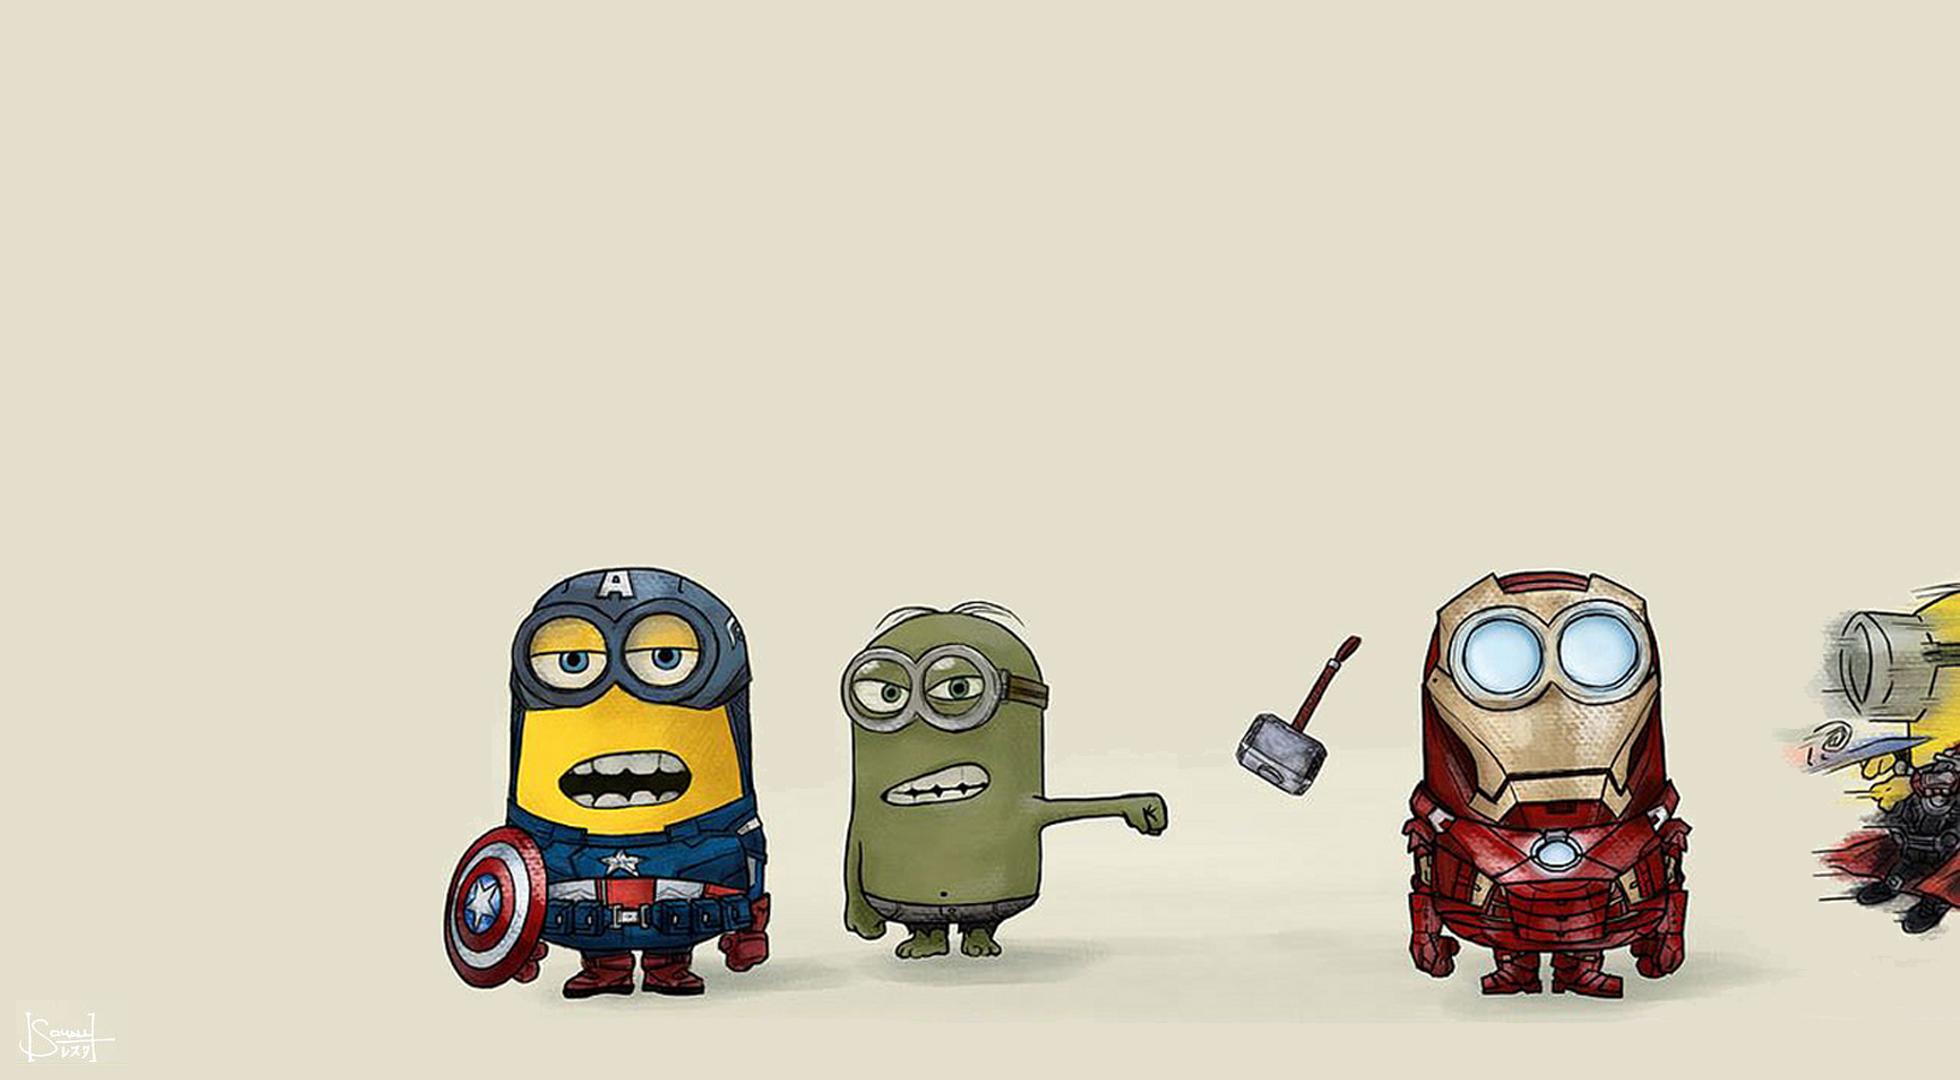 Despicable Avengers wallpaper (x post from wallpaper)